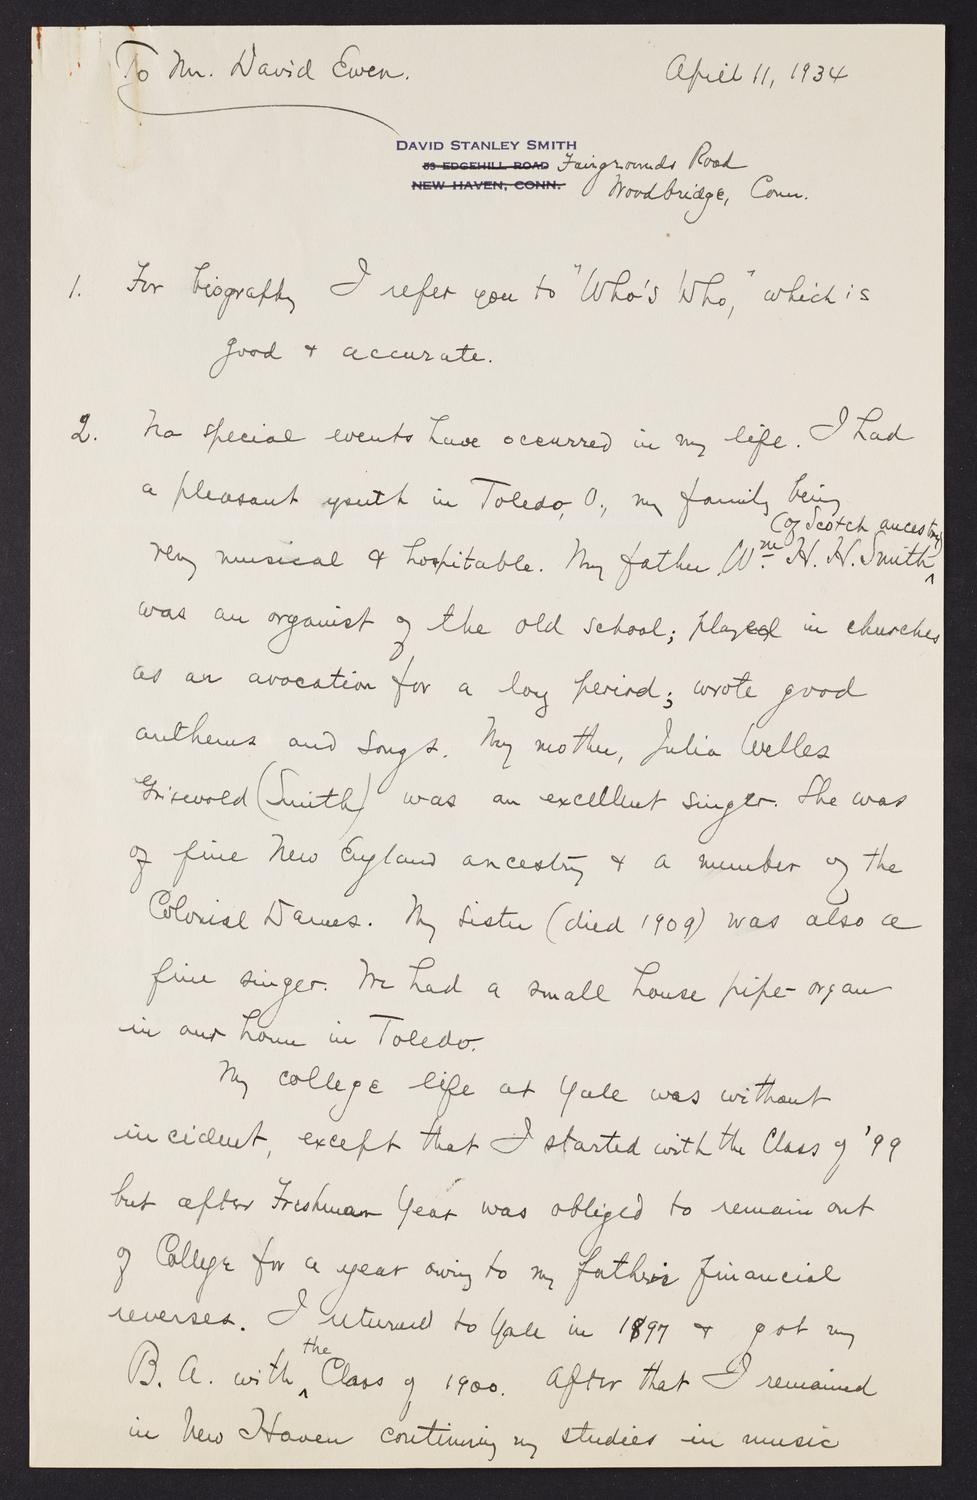 Correspondence from David Stanley Smith to David Ewen, page 1 of 5